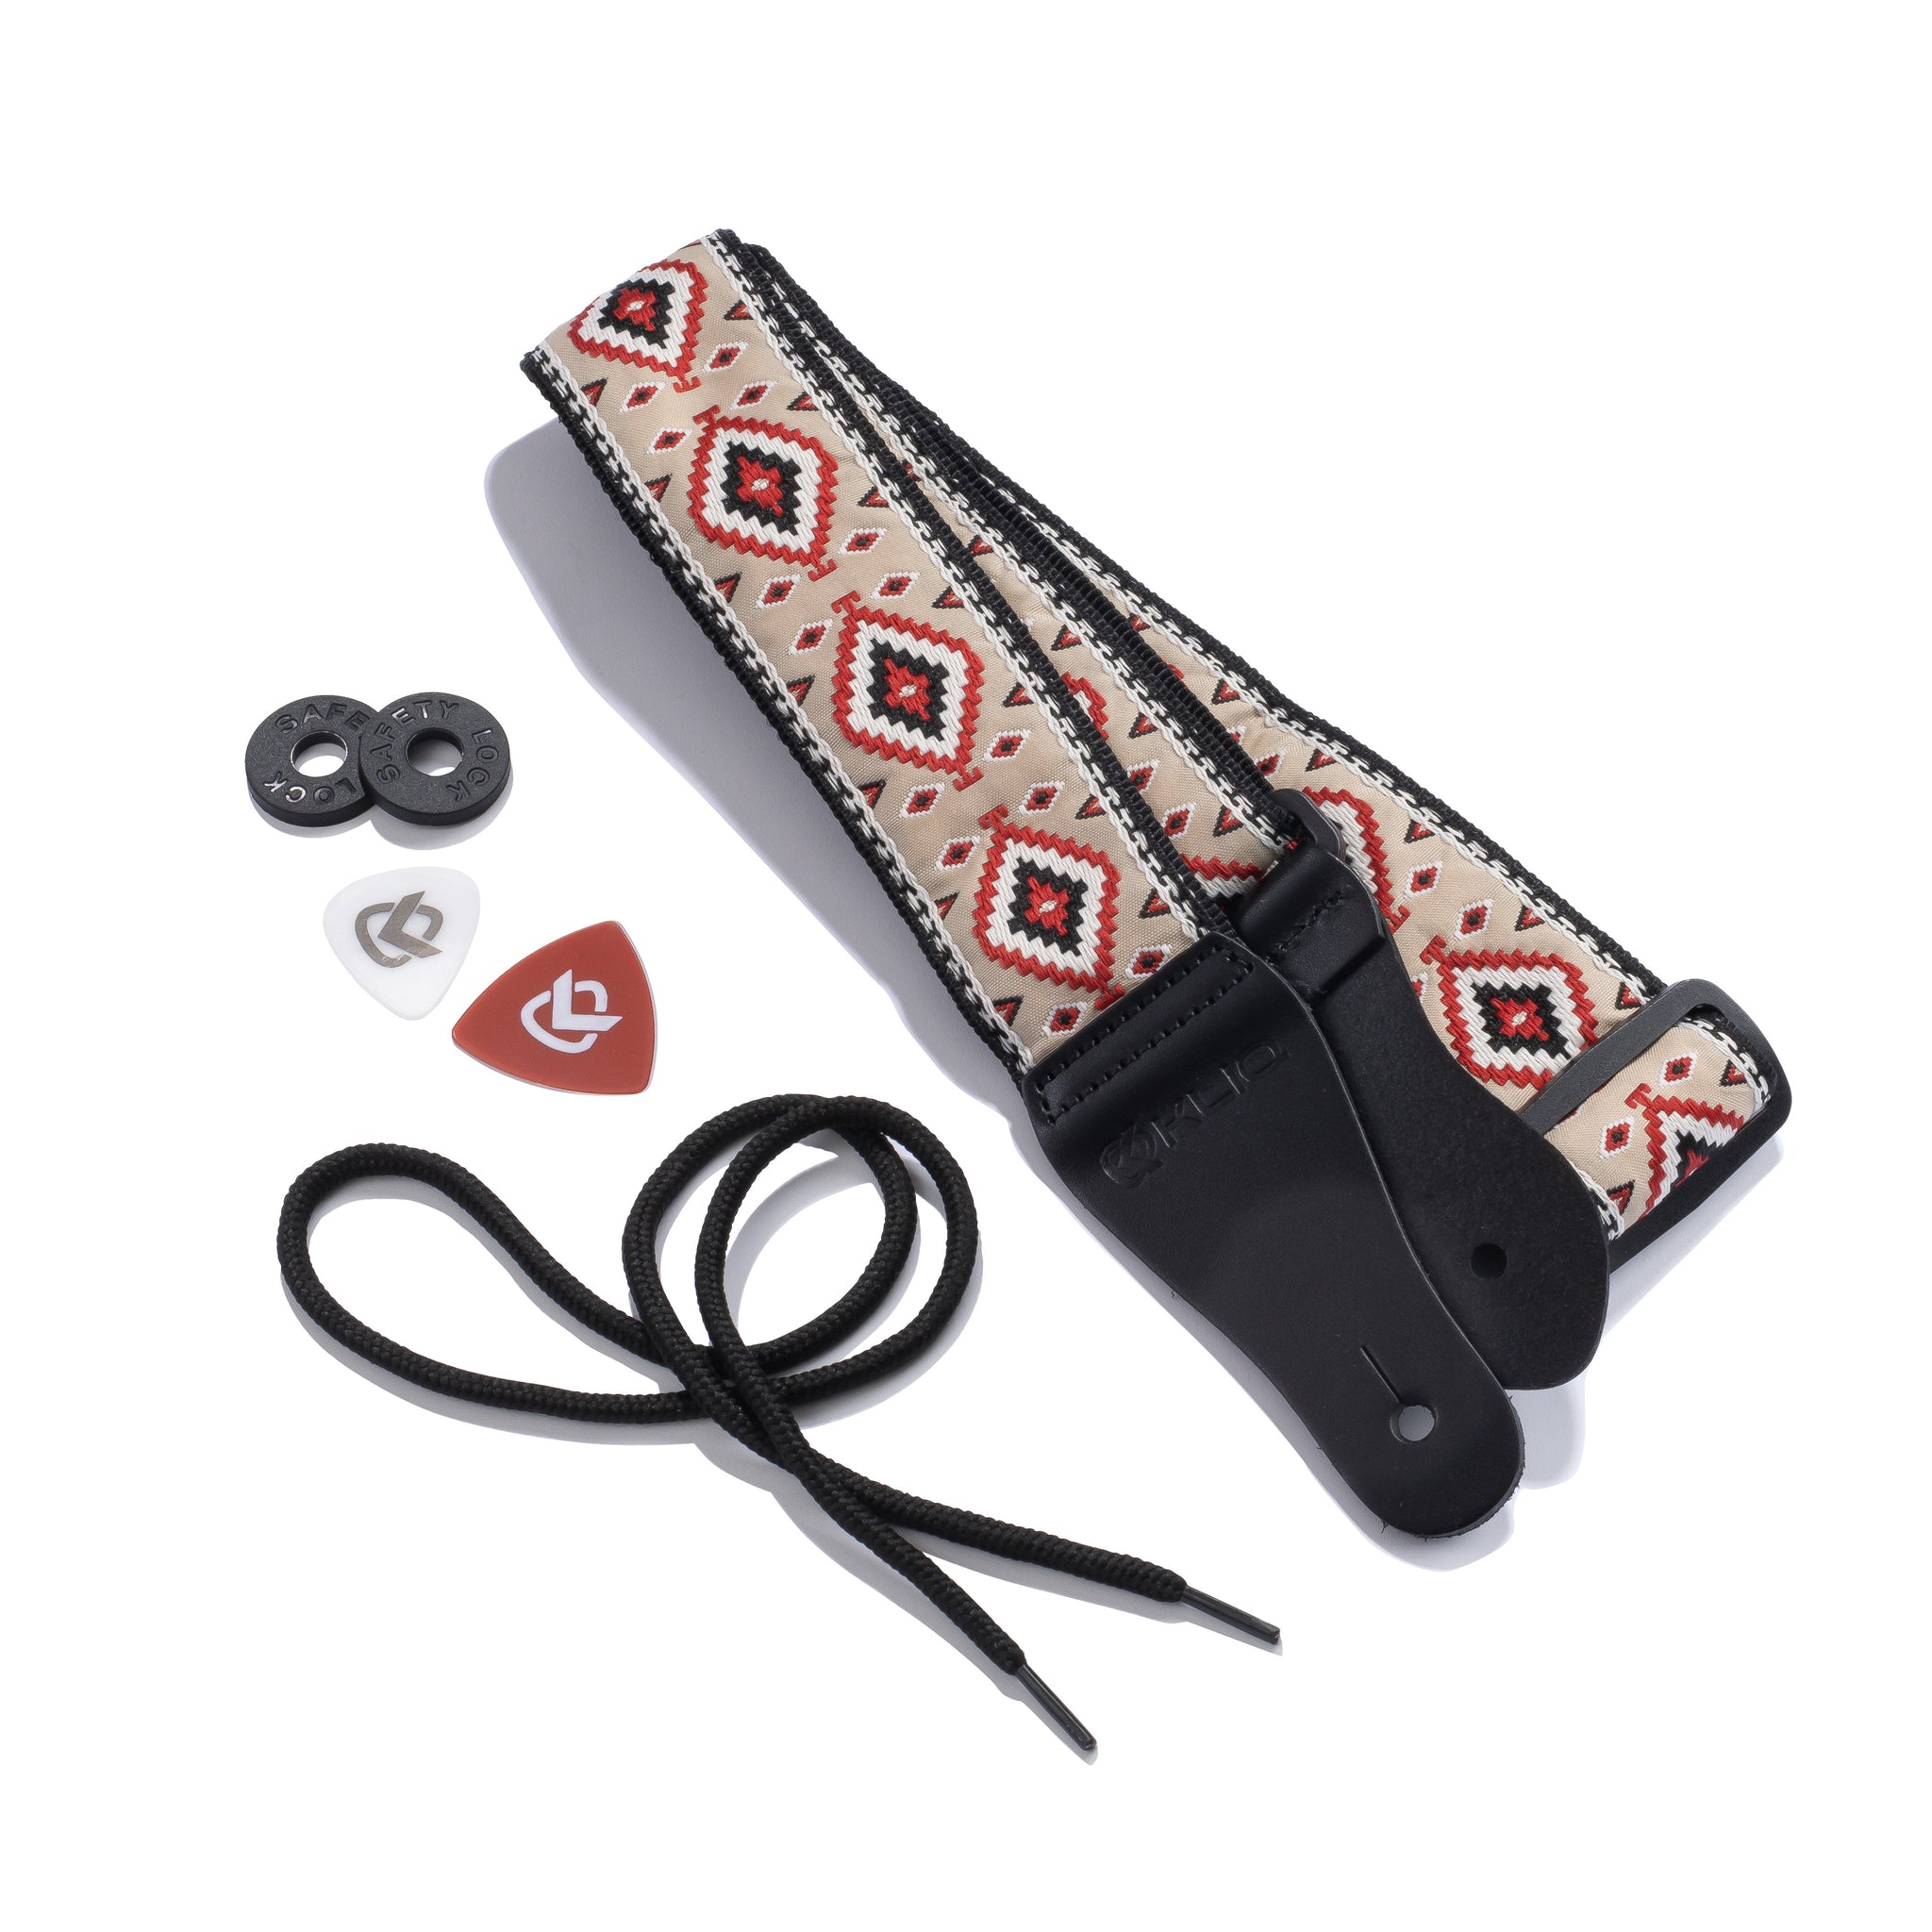  Guitar Strap For Acoustic Guitar , Electric Guitar and Bass  Guitar, Adjustable Multi Color Woven Guitar Strap W/ FREE BONUS 2 Picks +  Strap Locks + Strap Button. Gift Set For